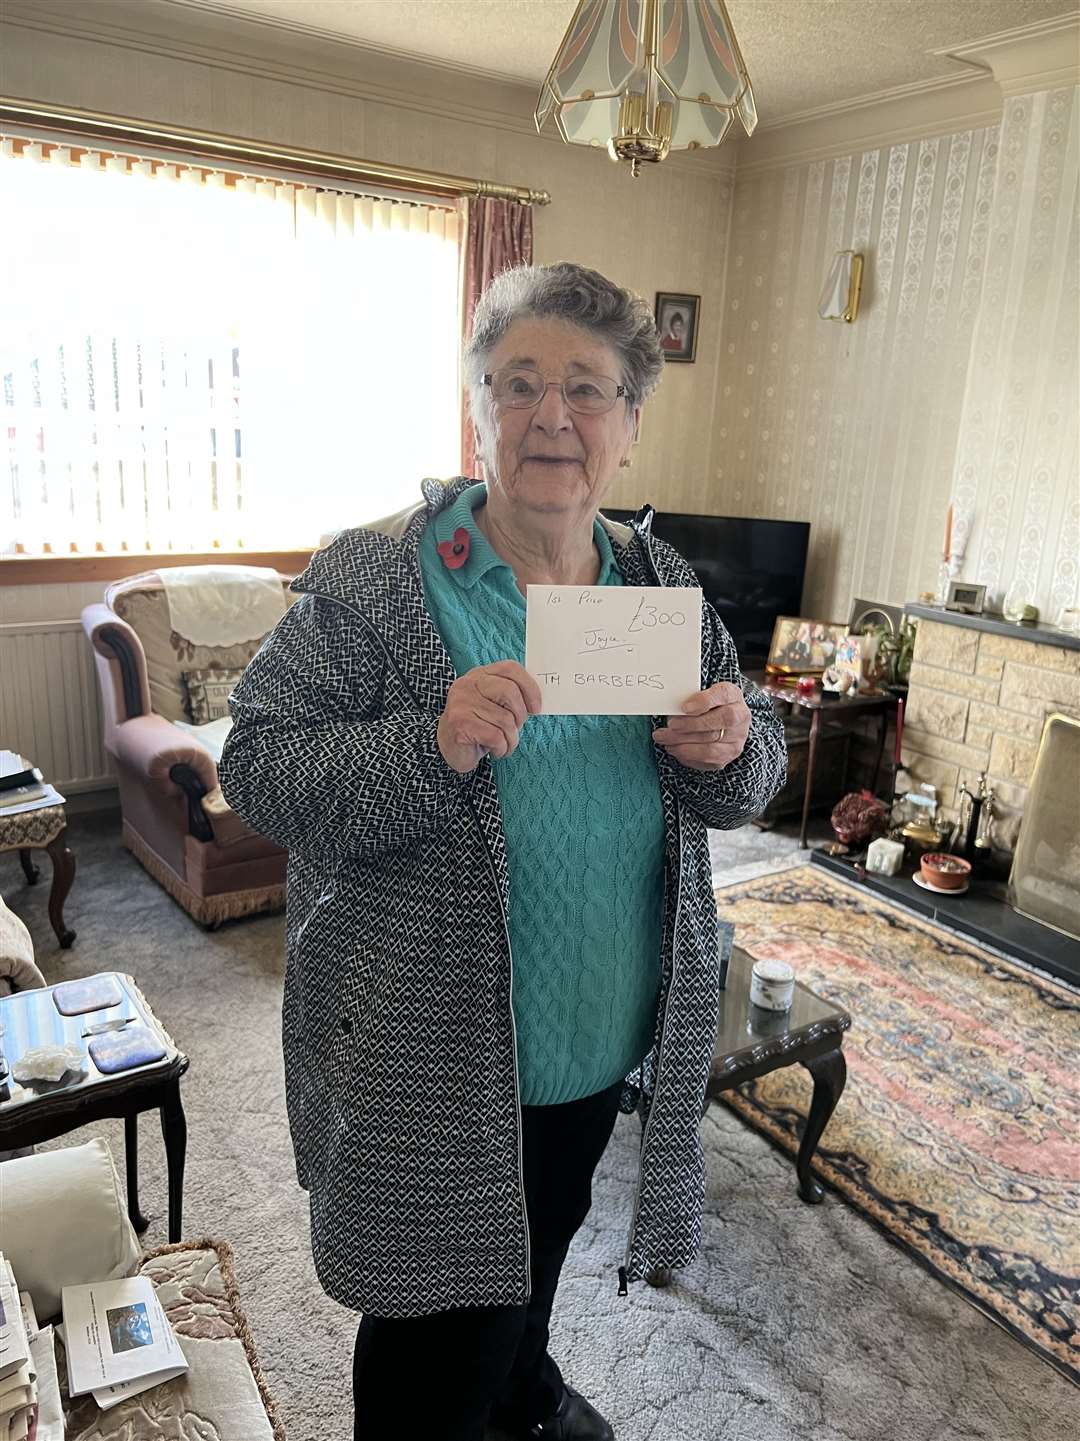 Joyce Collinson was shocked to win the £300 after being nominated by her neighbour.